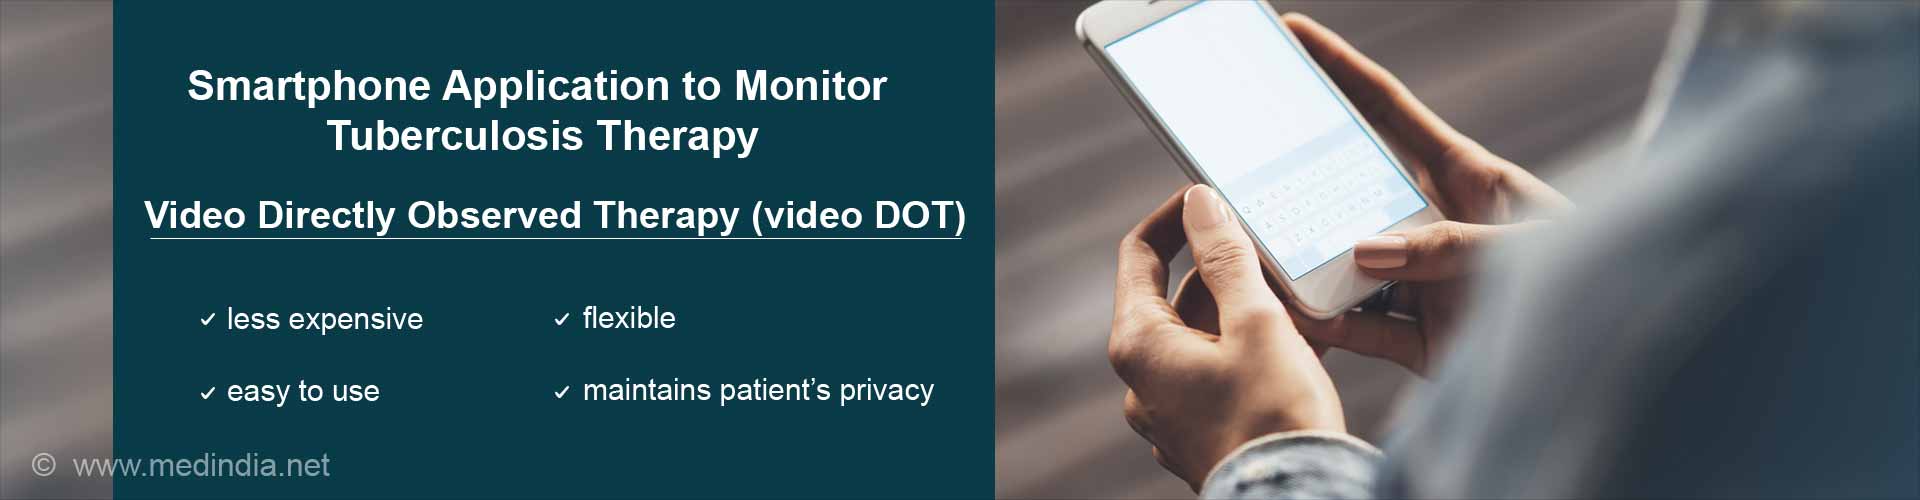 smartphone application to monitor tuberculosis therapy
- video directly observed therapy (video DOT)
- less expensive
- flexible
- easy to use
- maintains patient''s privacy